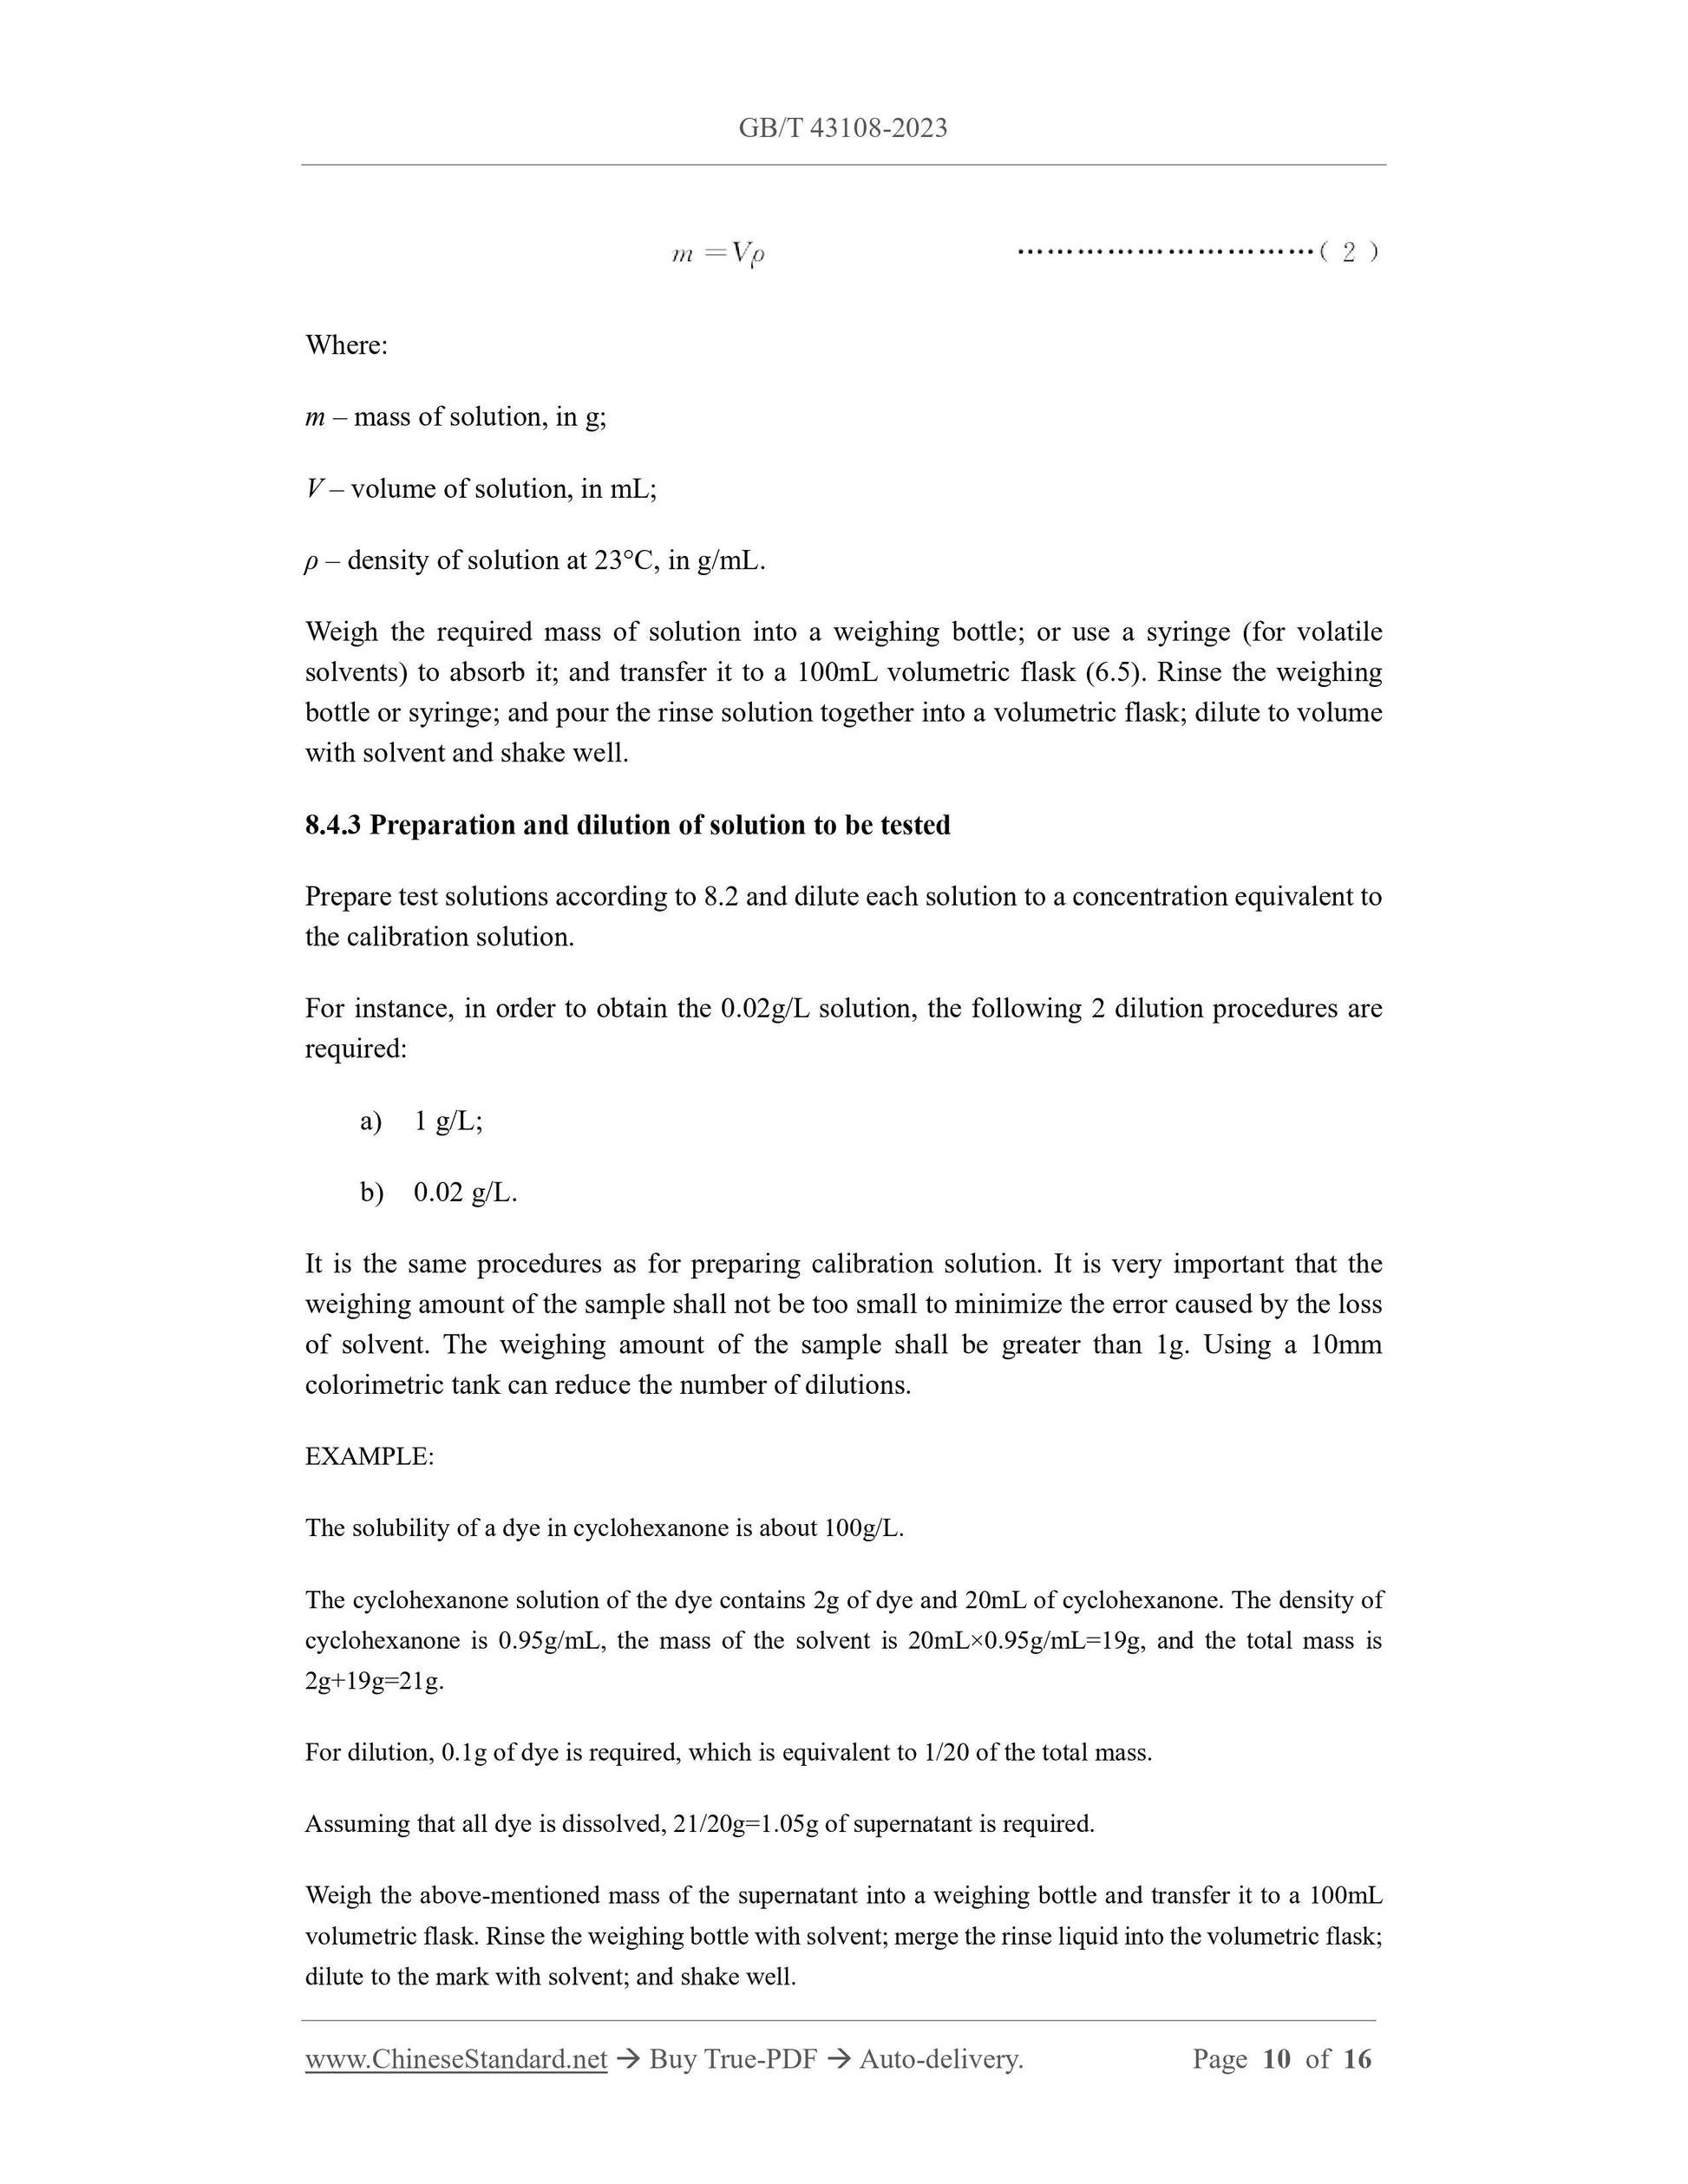 GB/T 43108-2023 Page 7